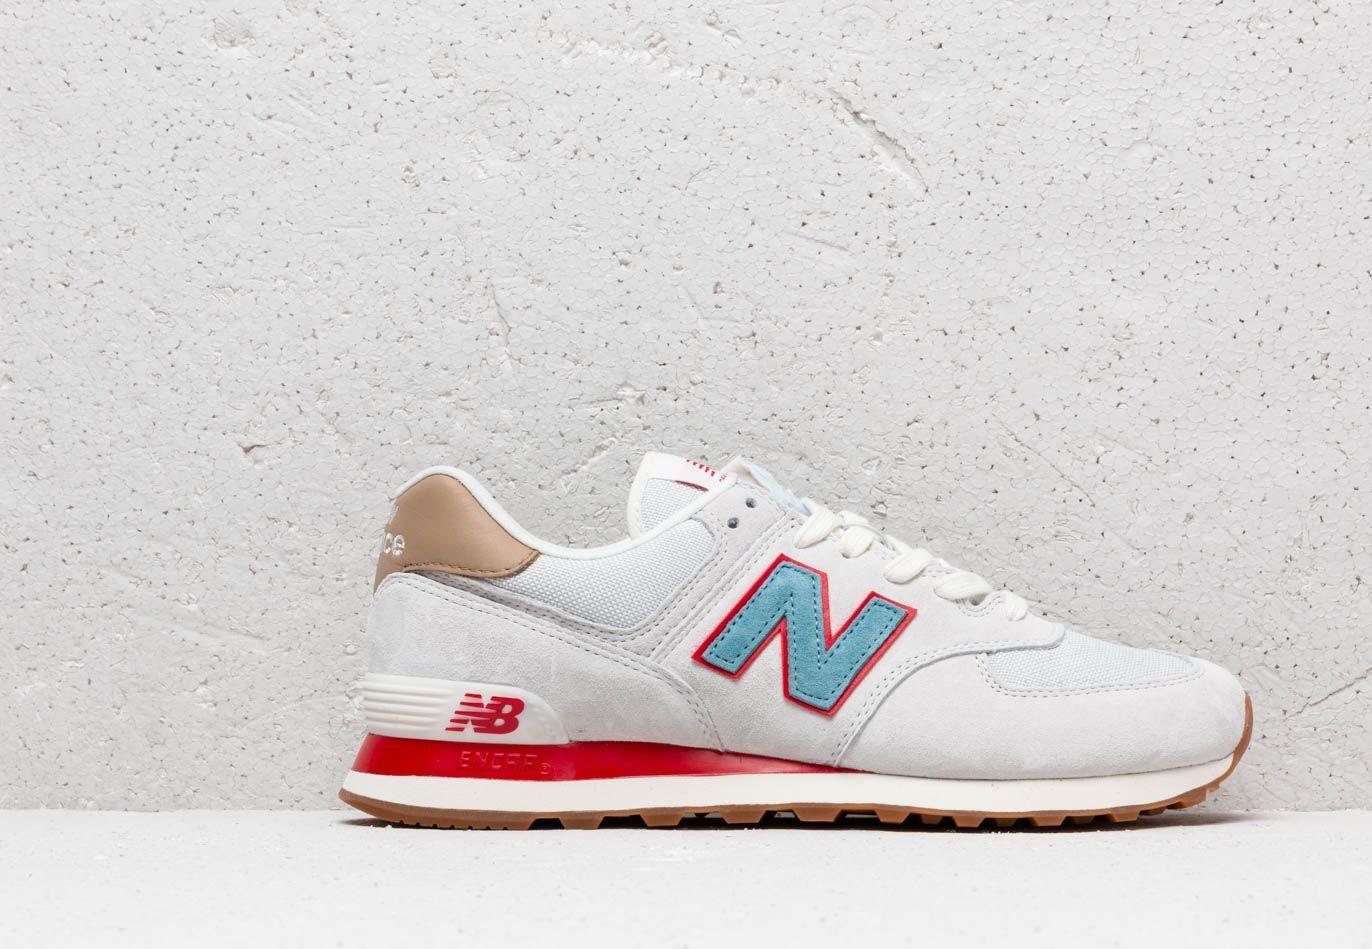 New Balance Suede 574 Grey/ Blue/ Red 